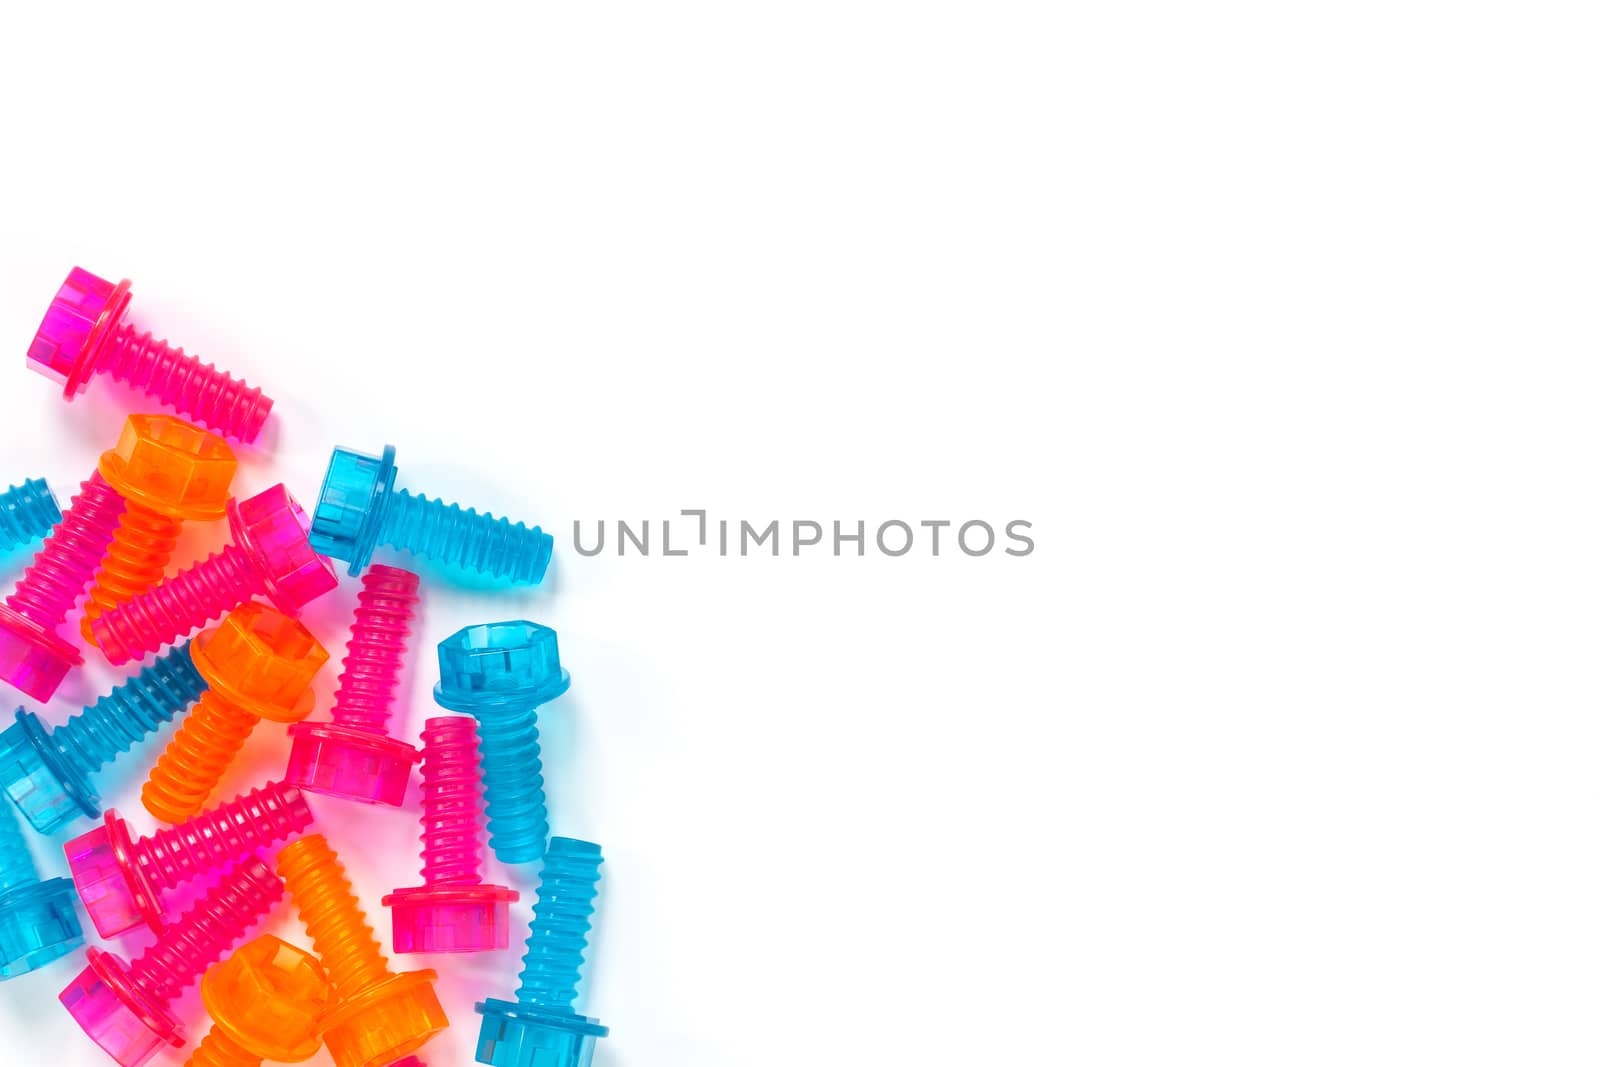 Colored translucent toy bolts isolated on white background. Flat lay. Concept of World Dad's Day, unisex toys for early development, role-playing games. Layout for social media, for toy stores.